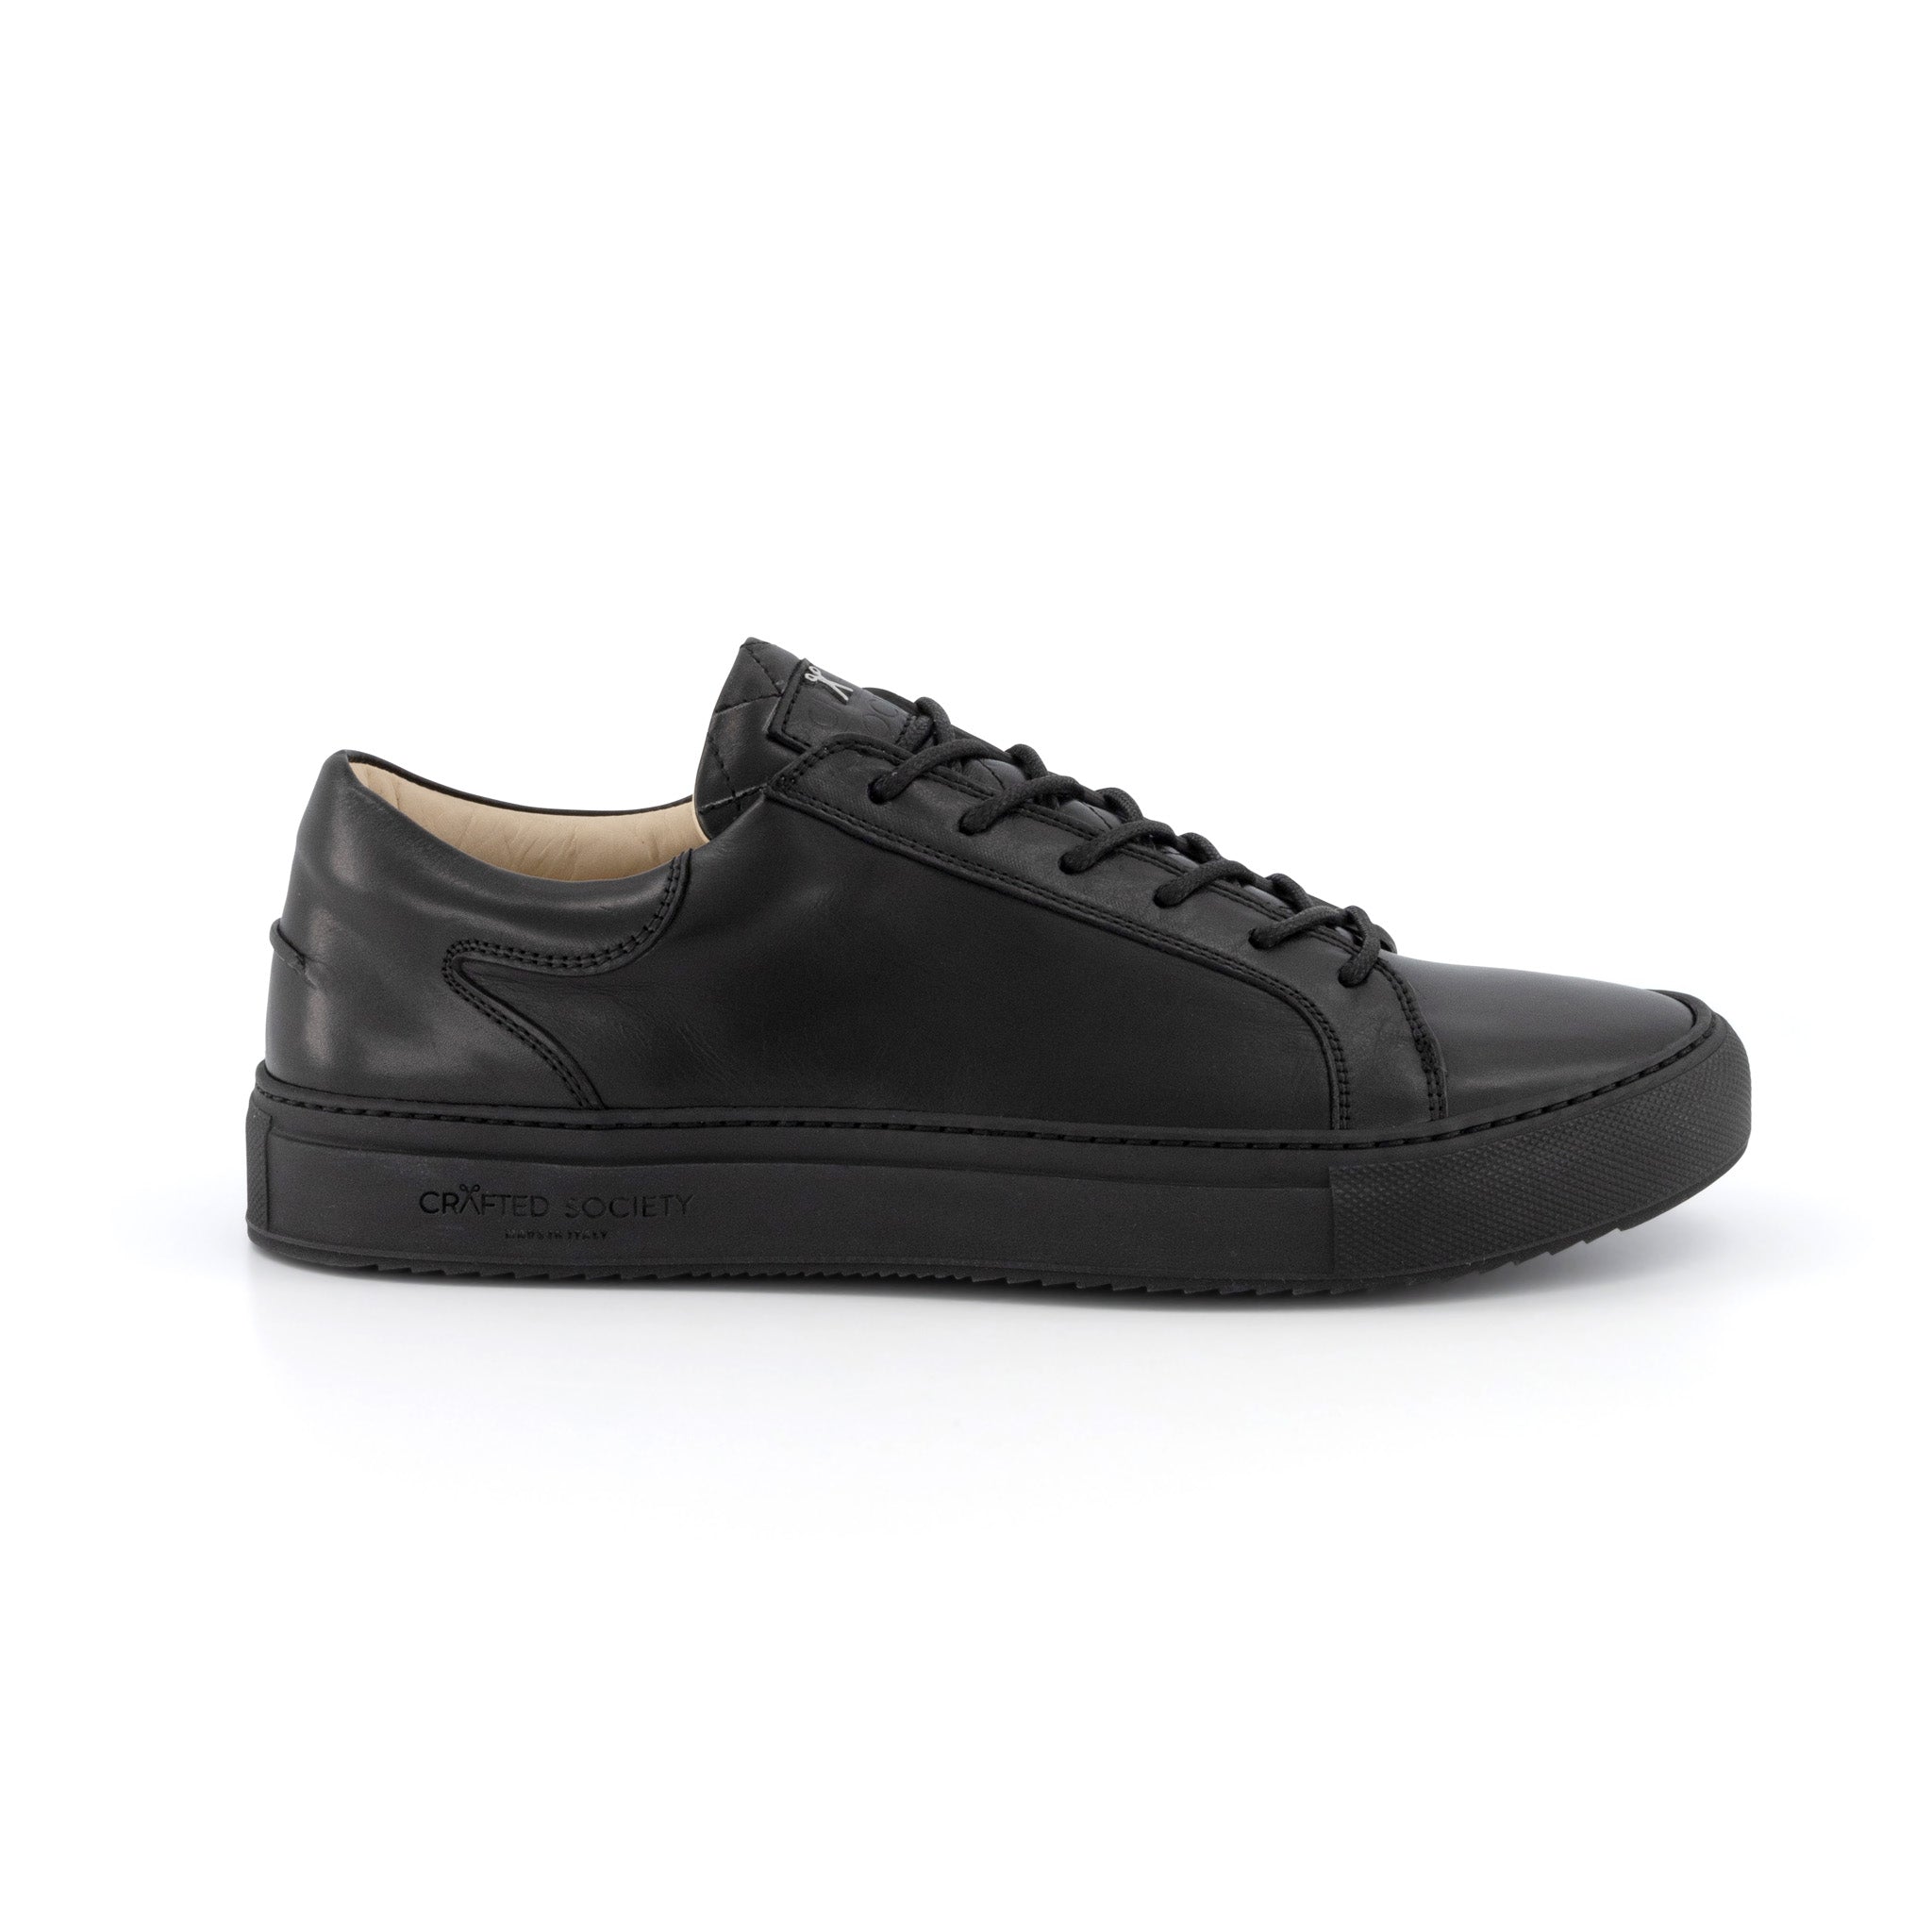 Mario Low Refined Sneaker | Black Full Grain Leather | Black Outsole | Made in Italy